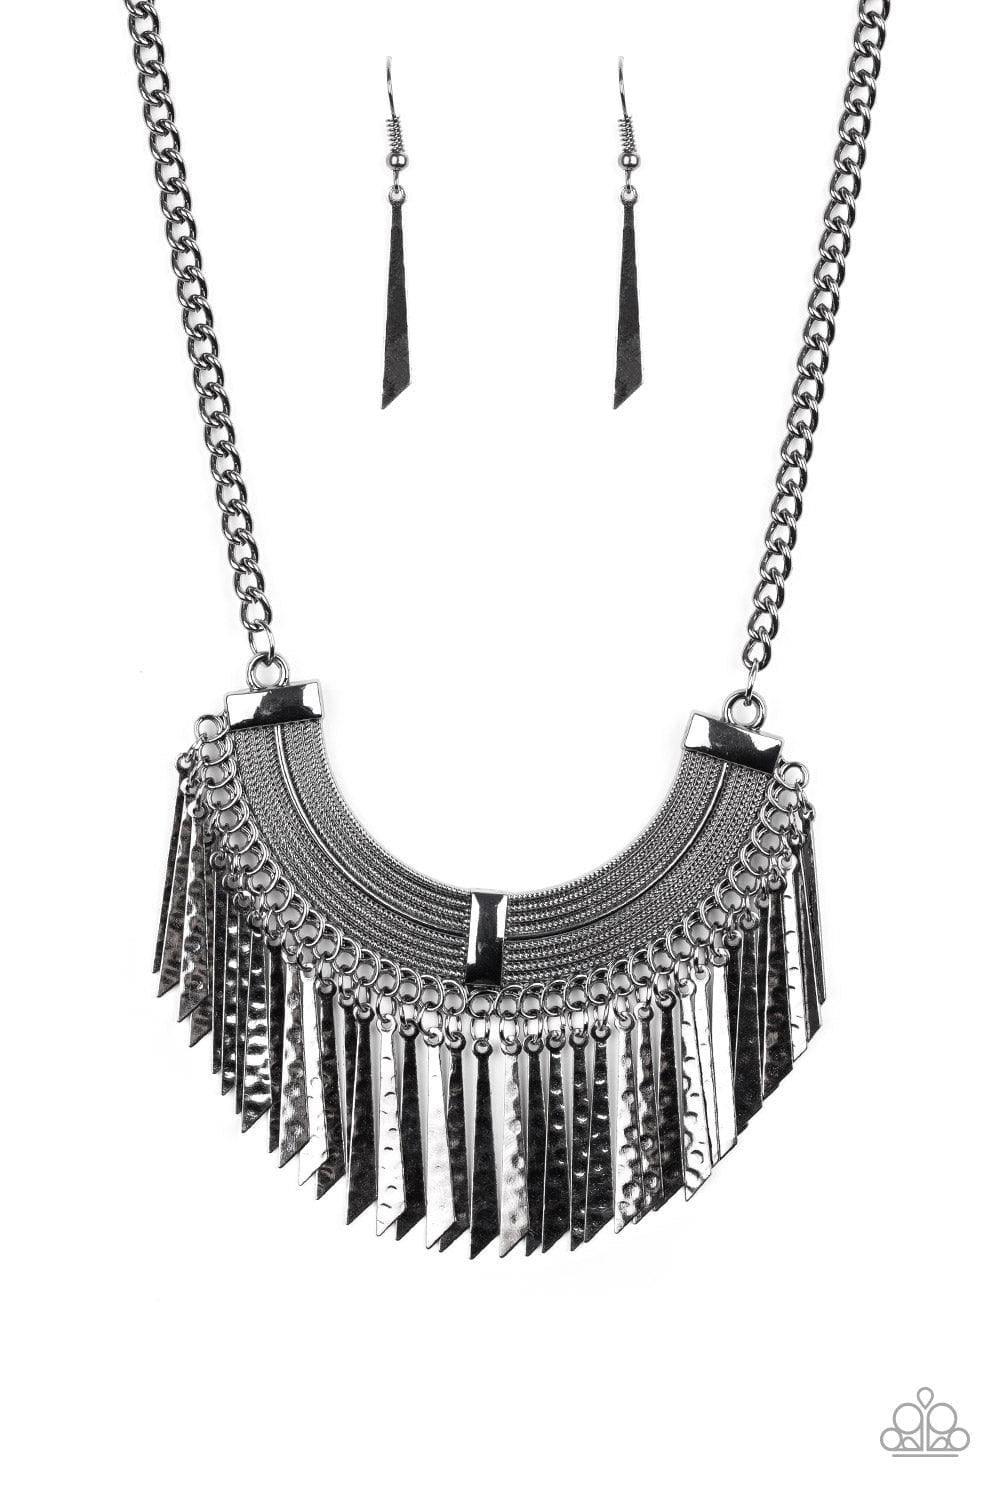 Paparazzi Accessories - Impressively Incan - Black Necklace - Bling by JessieK